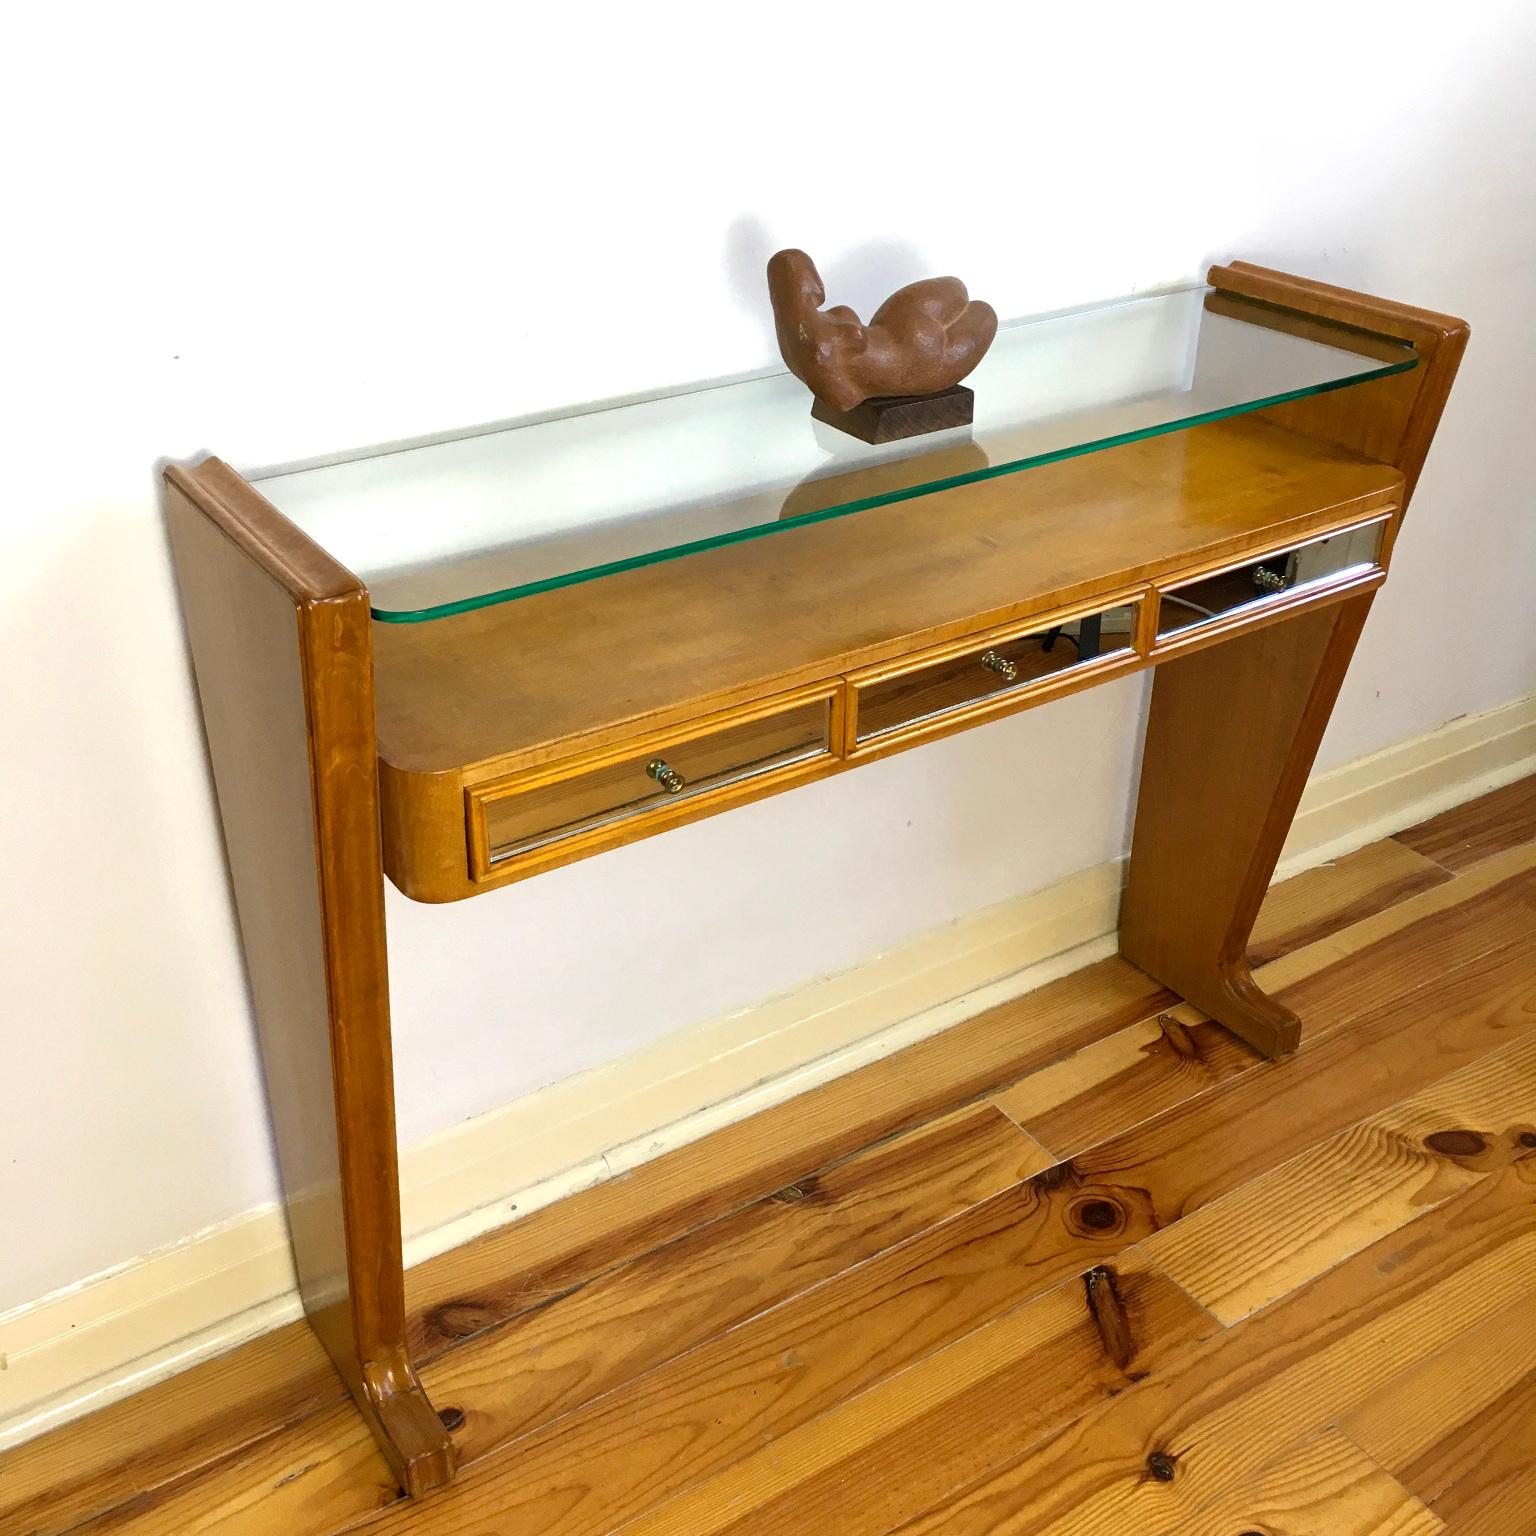 Small Italian sycamore console table from the 1950s with glass top and three mirrored drawers
Perfect for an entrance or a corridor.